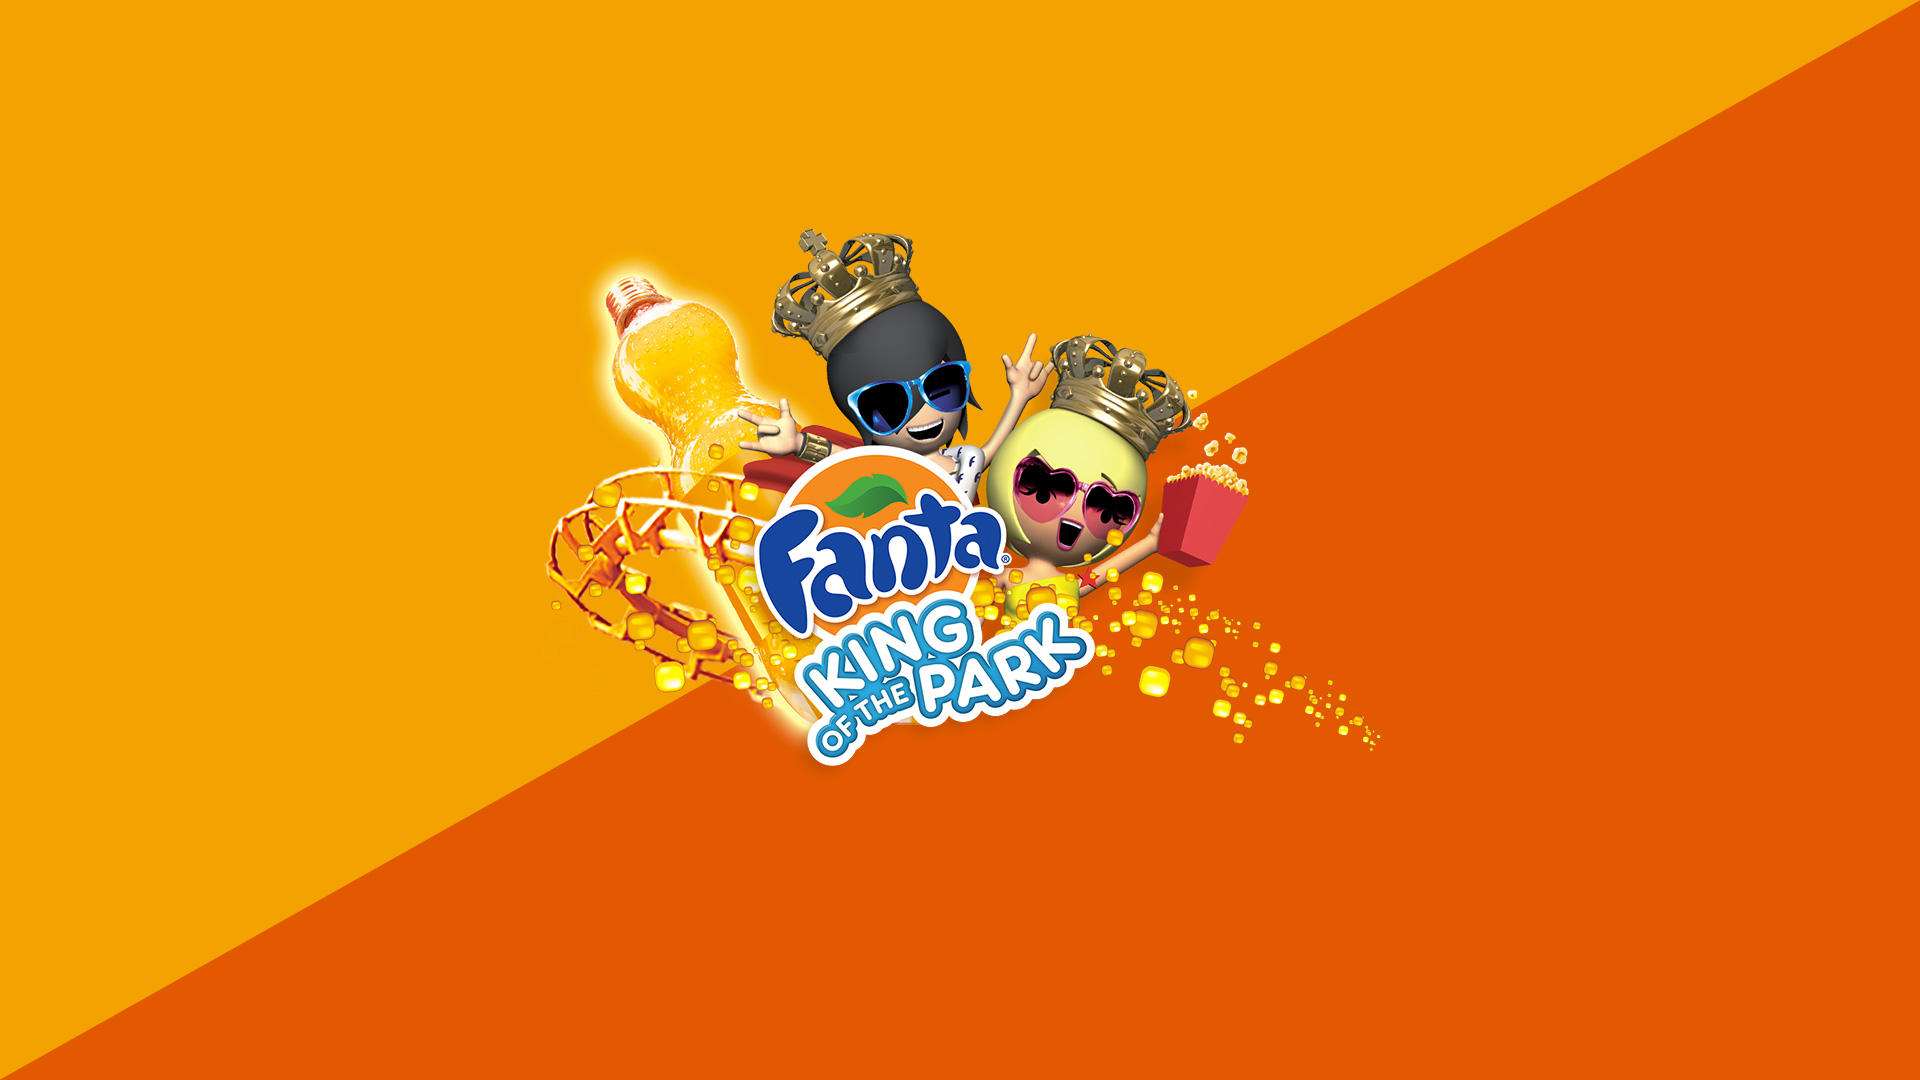 Animations Related To The World Of Fanta - Graphic Design , HD Wallpaper & Backgrounds